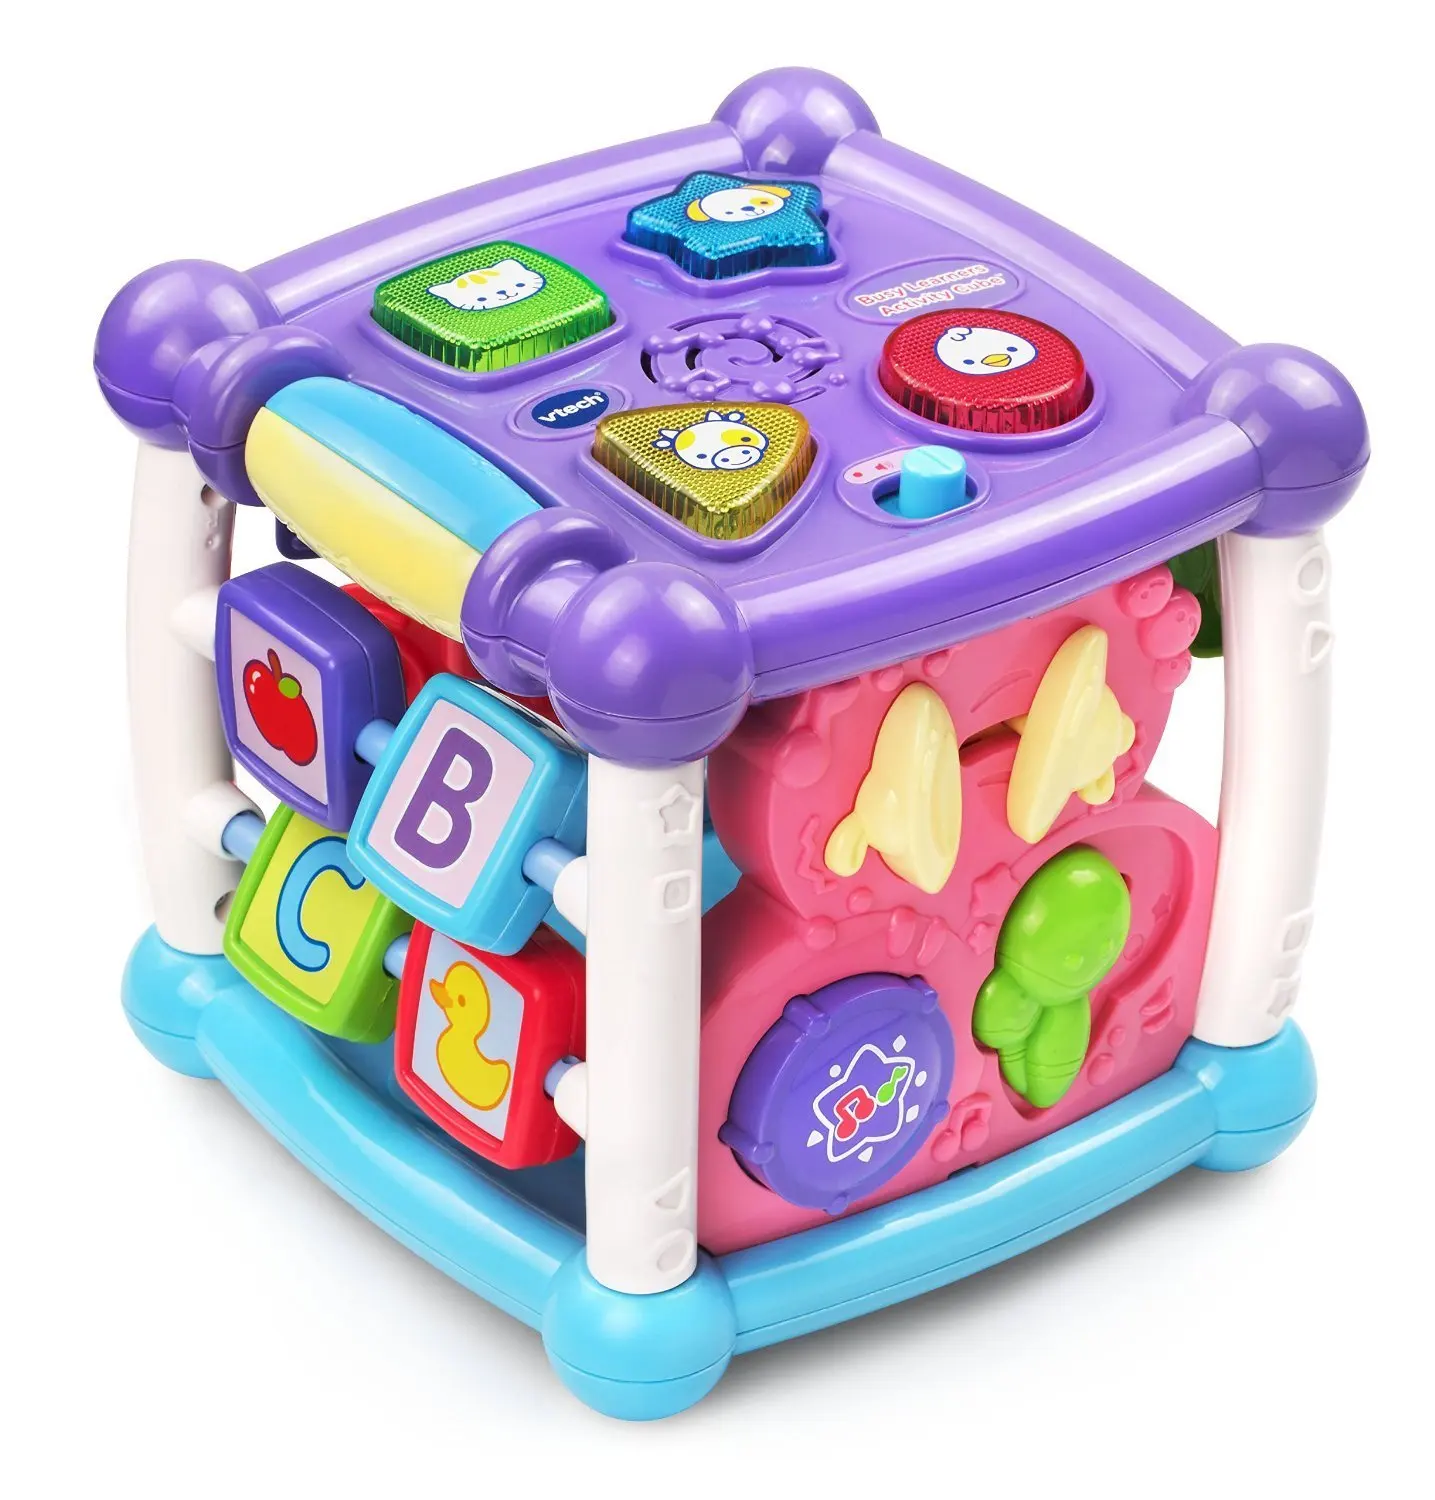 Buy Vtech Early Education Toy Busy Learners Activity Cube Purple Music Toy For Kids In Cheap Price On Alibaba Com